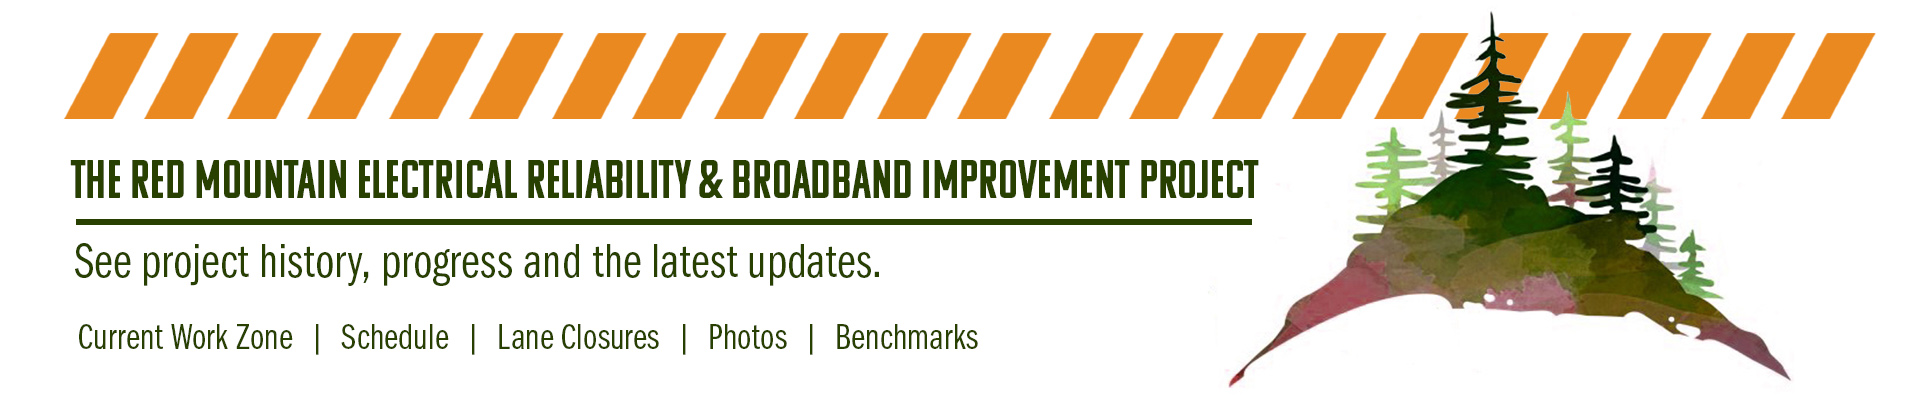 Red Mountain Electrical Reliability & Broadband Improvement Project